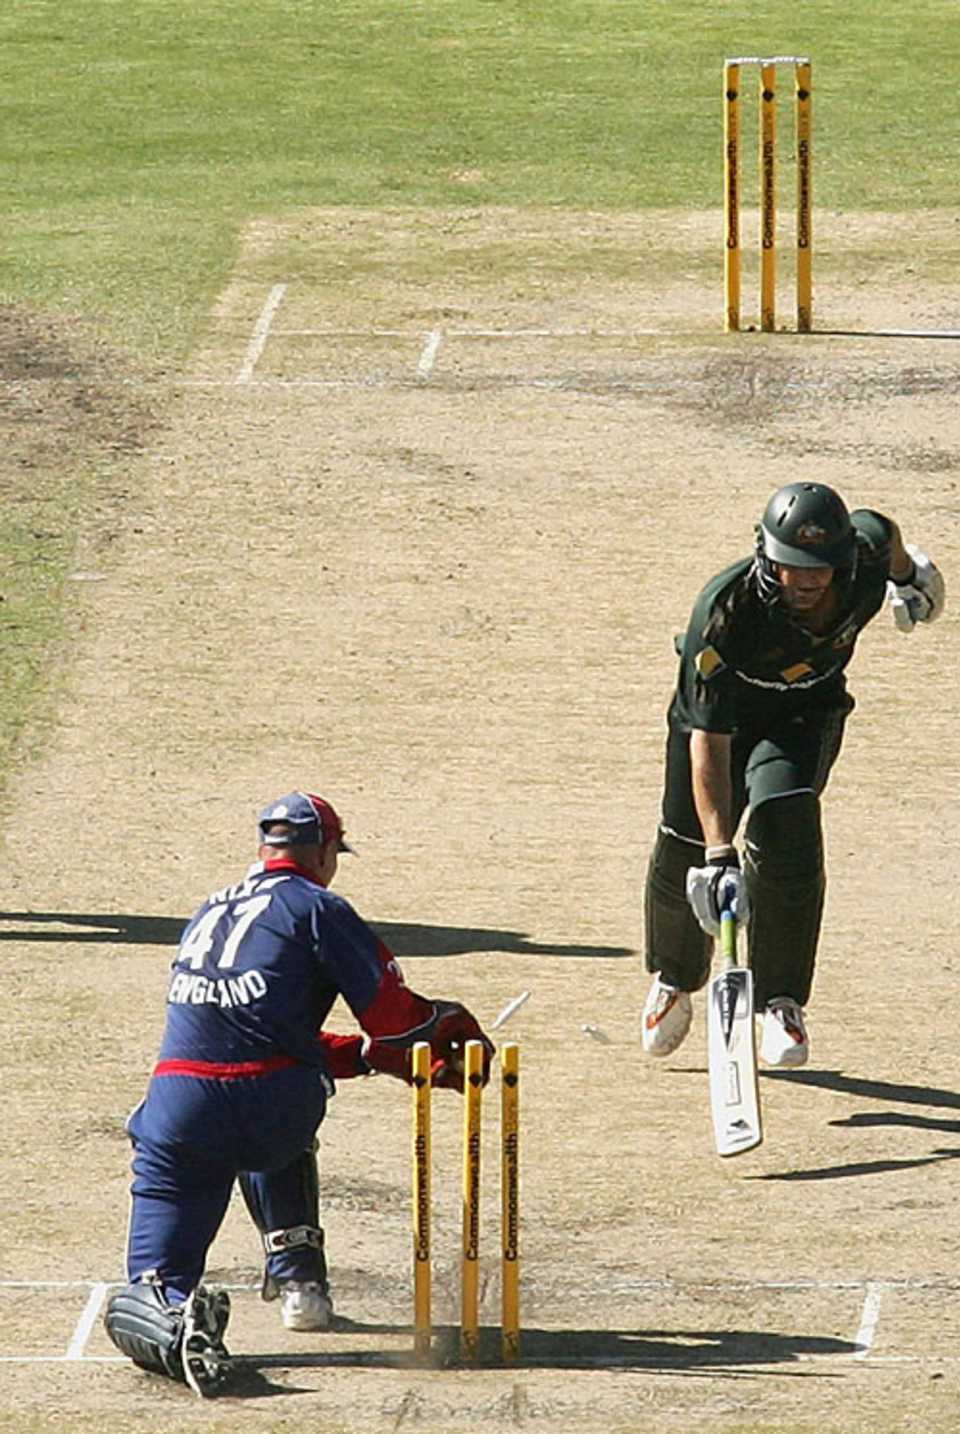 Adam Gilchrist is run out by Paul Nixon, Australia v England, CB Series, 7th match, Adelaide, January 26, 2007